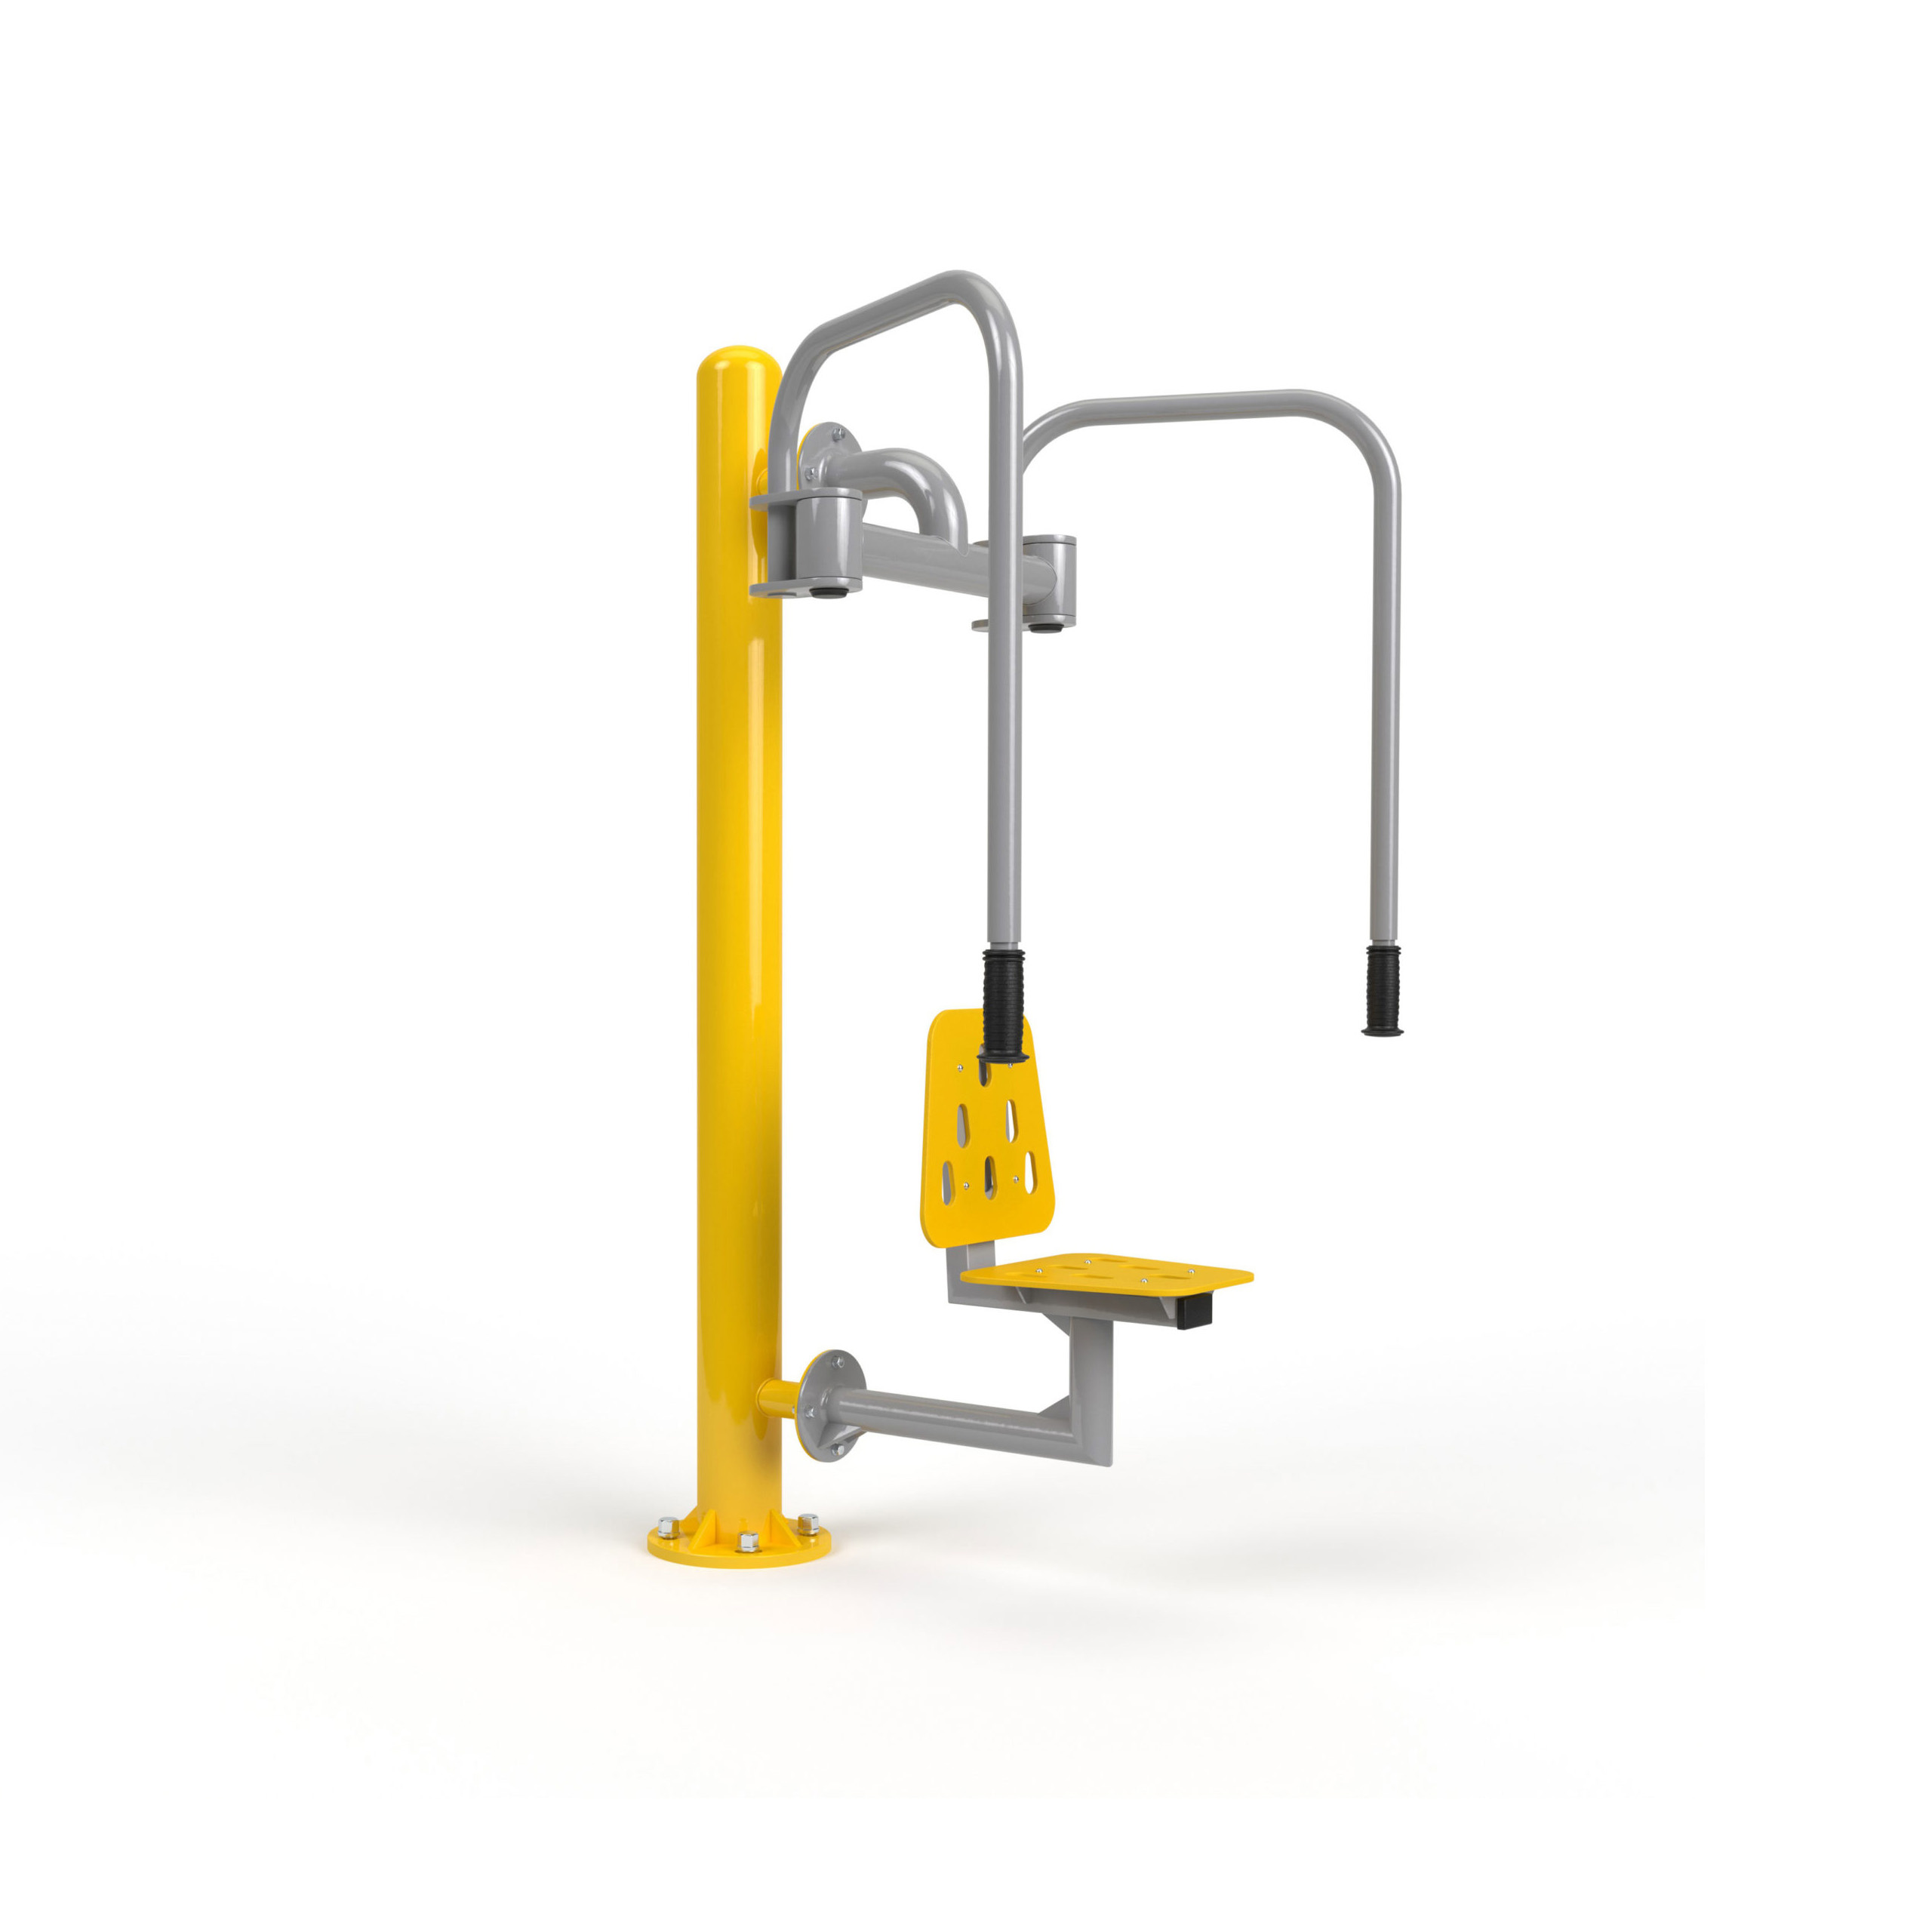 Butterfly + Pole Outdoor Fitness Equipment